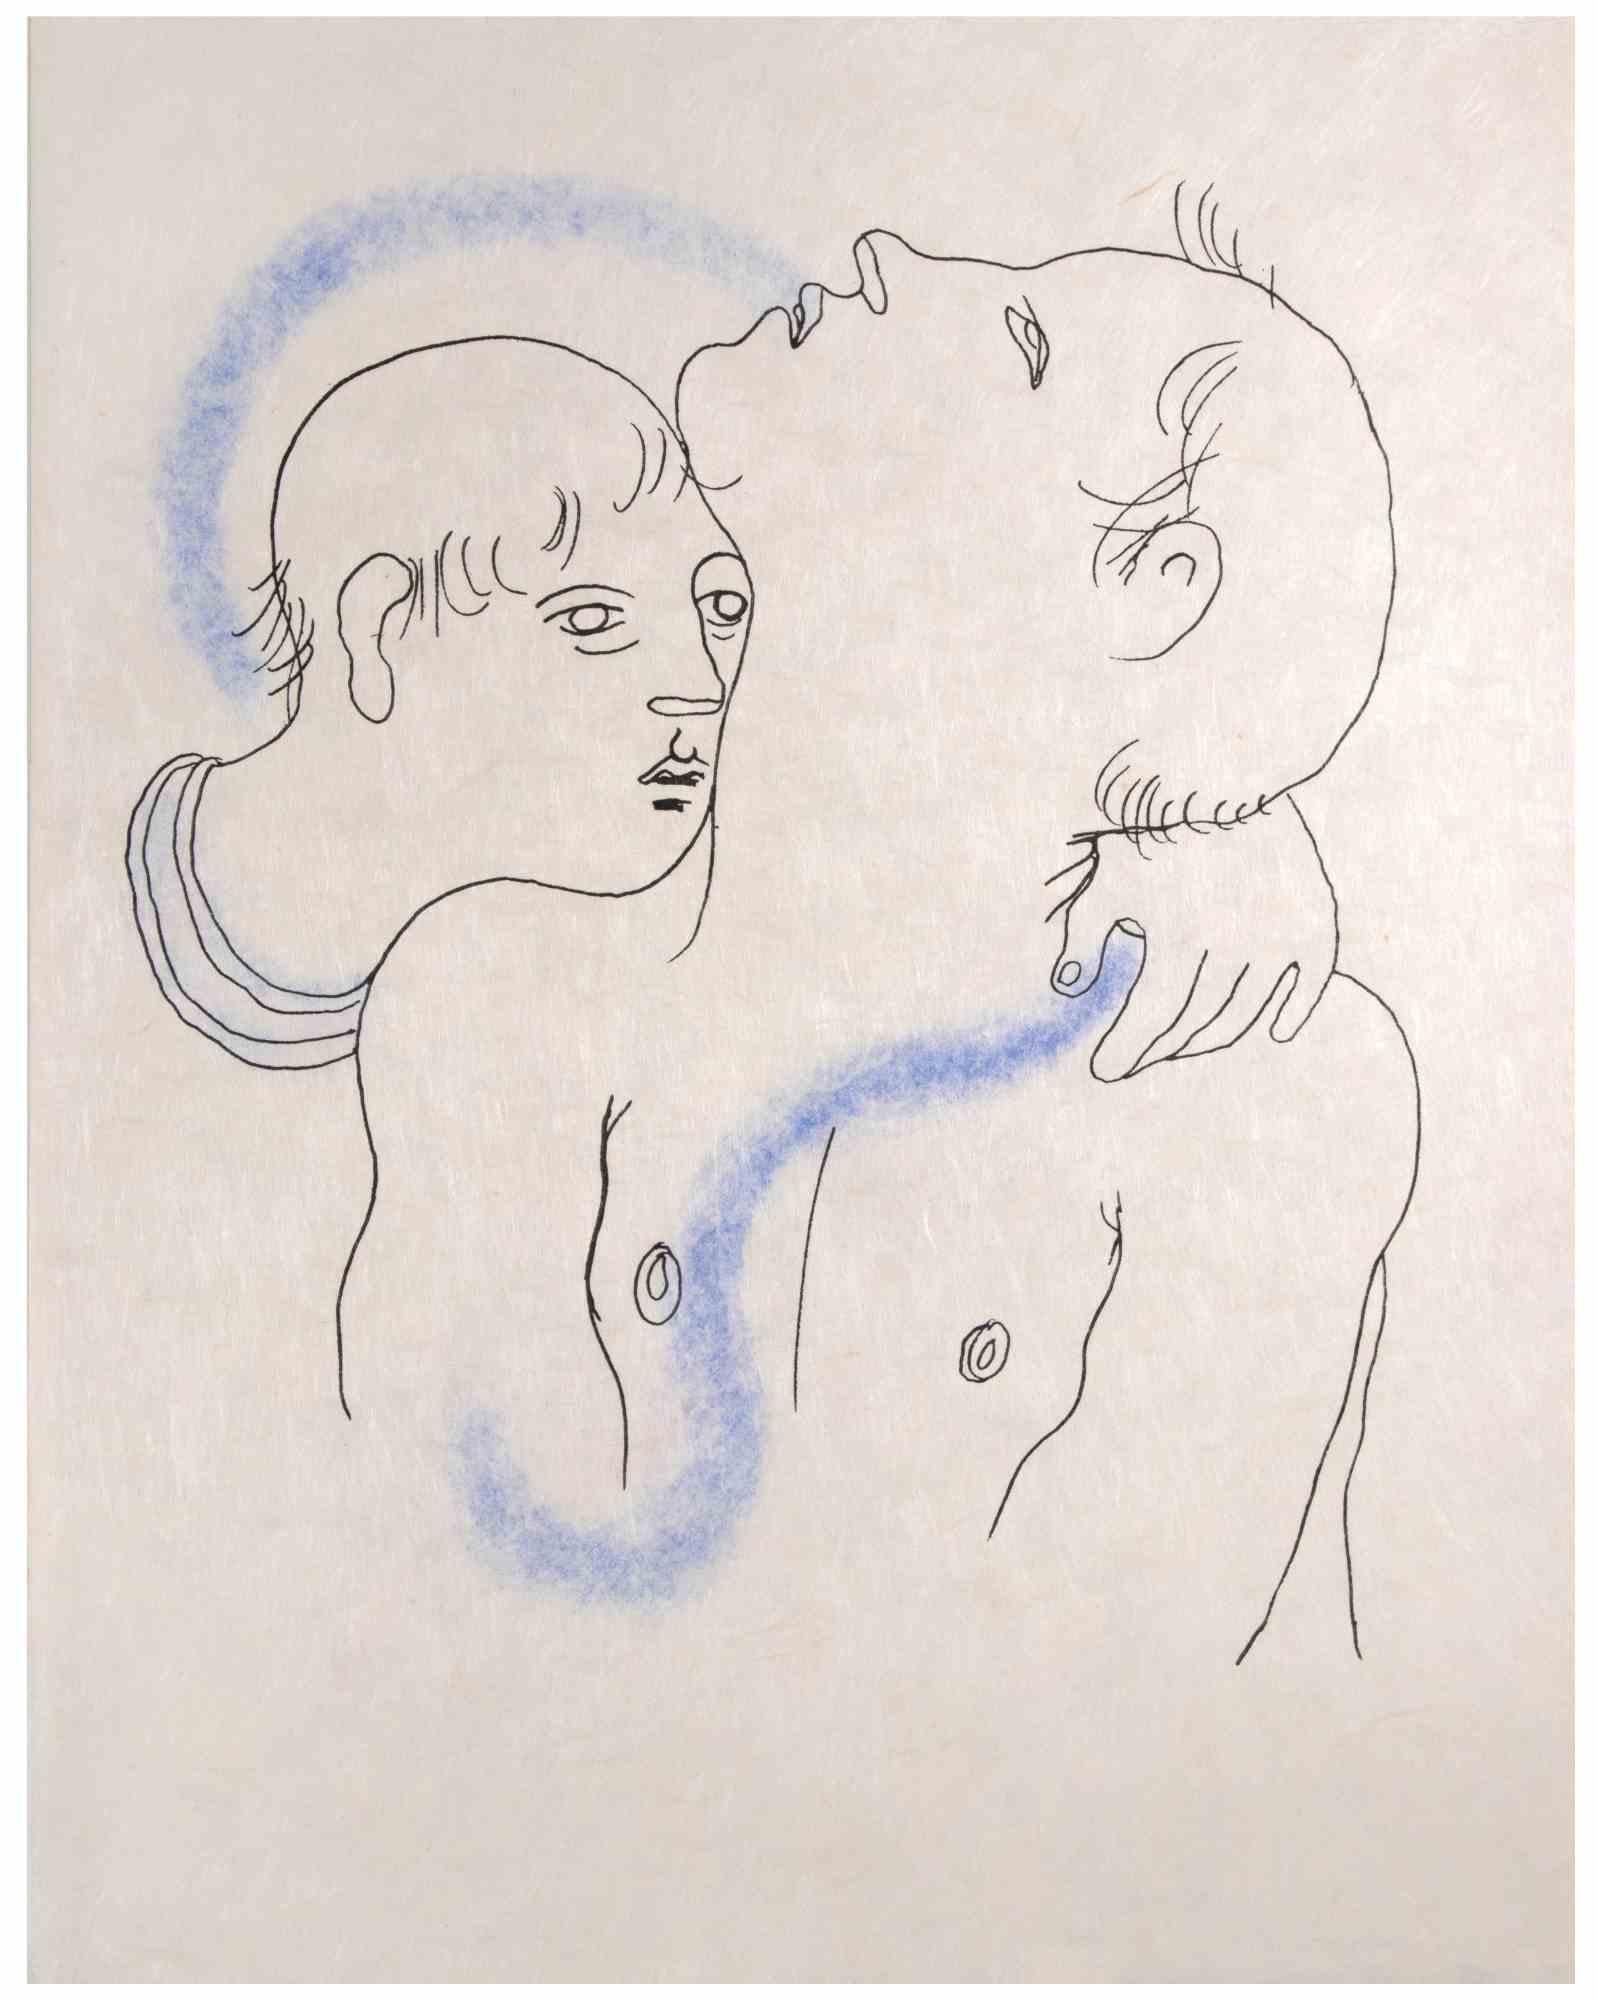 Lovers is a Colored lithograph realized by Jean Cocteau (1889 -1963) in 1930 ca. 

French draftsman, poet, essayist, playwright, librettist, film director.

Good conditions.

Jean Cocteau , influential french artist and writer, is a major figure of